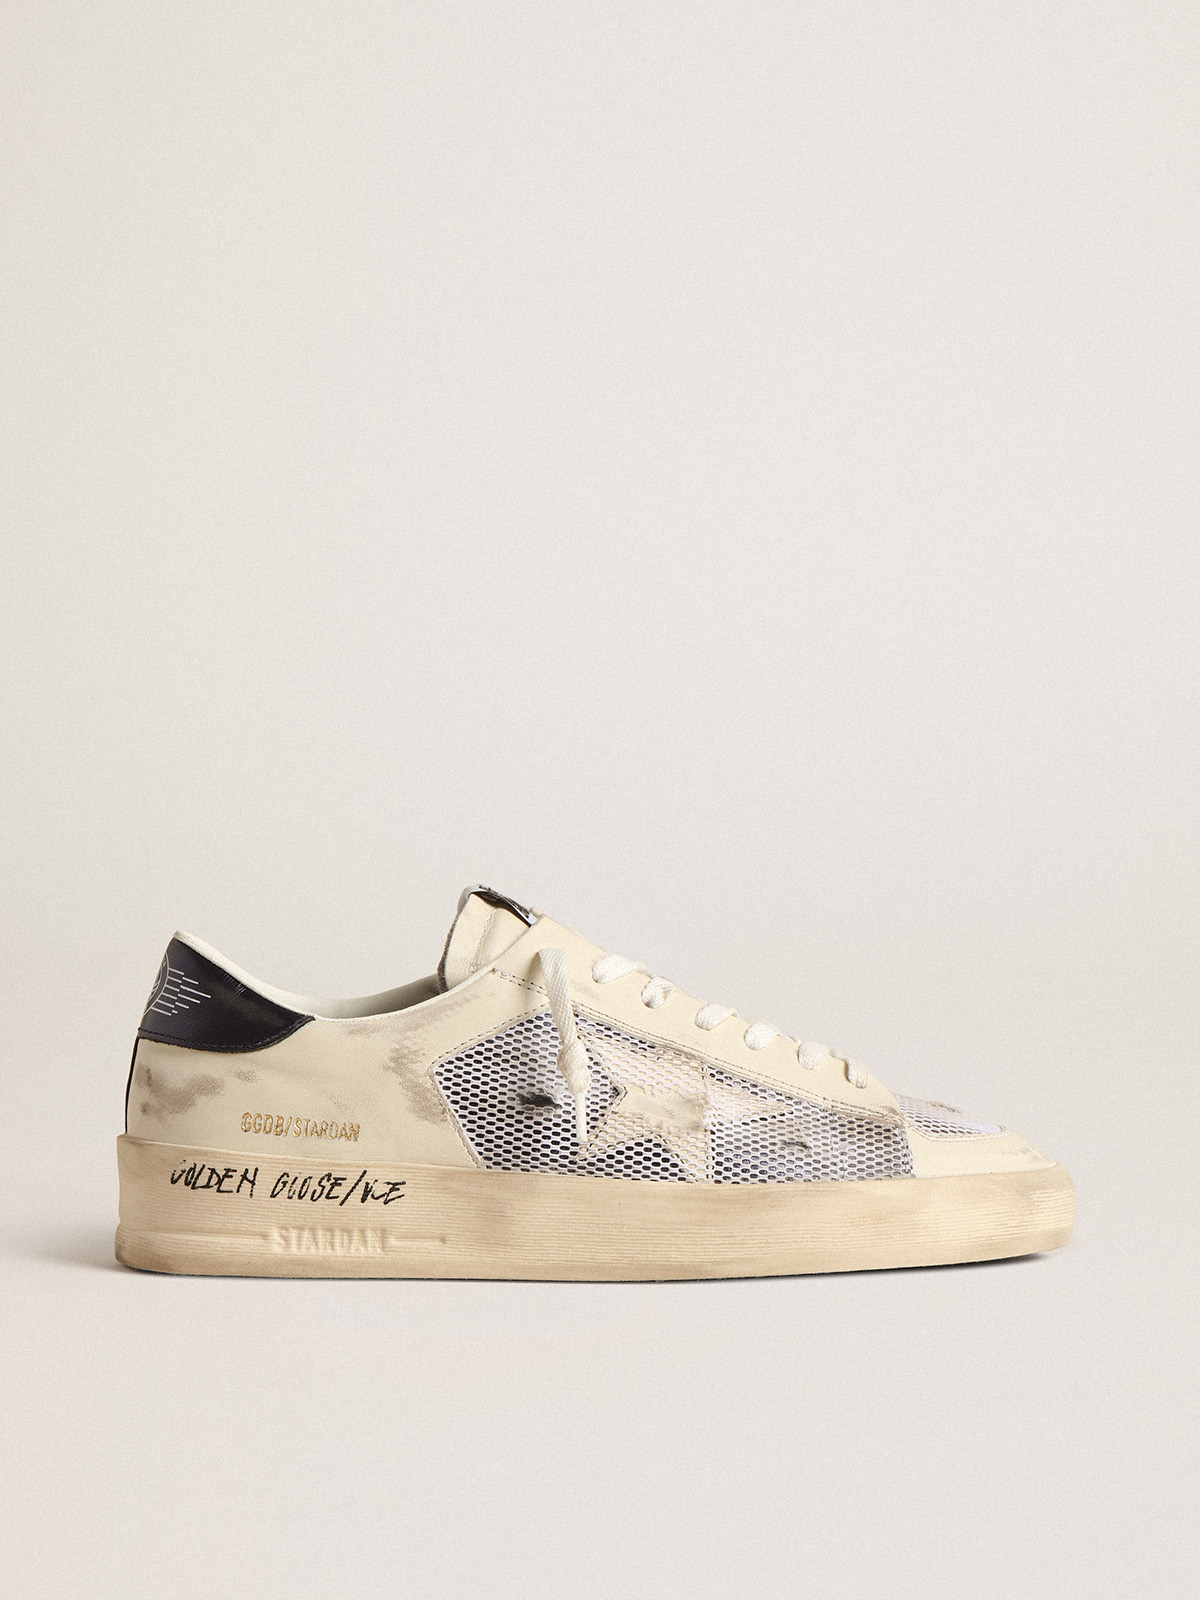 Stardan in white leather and mesh with blue metallic heel tab | Golden Goose